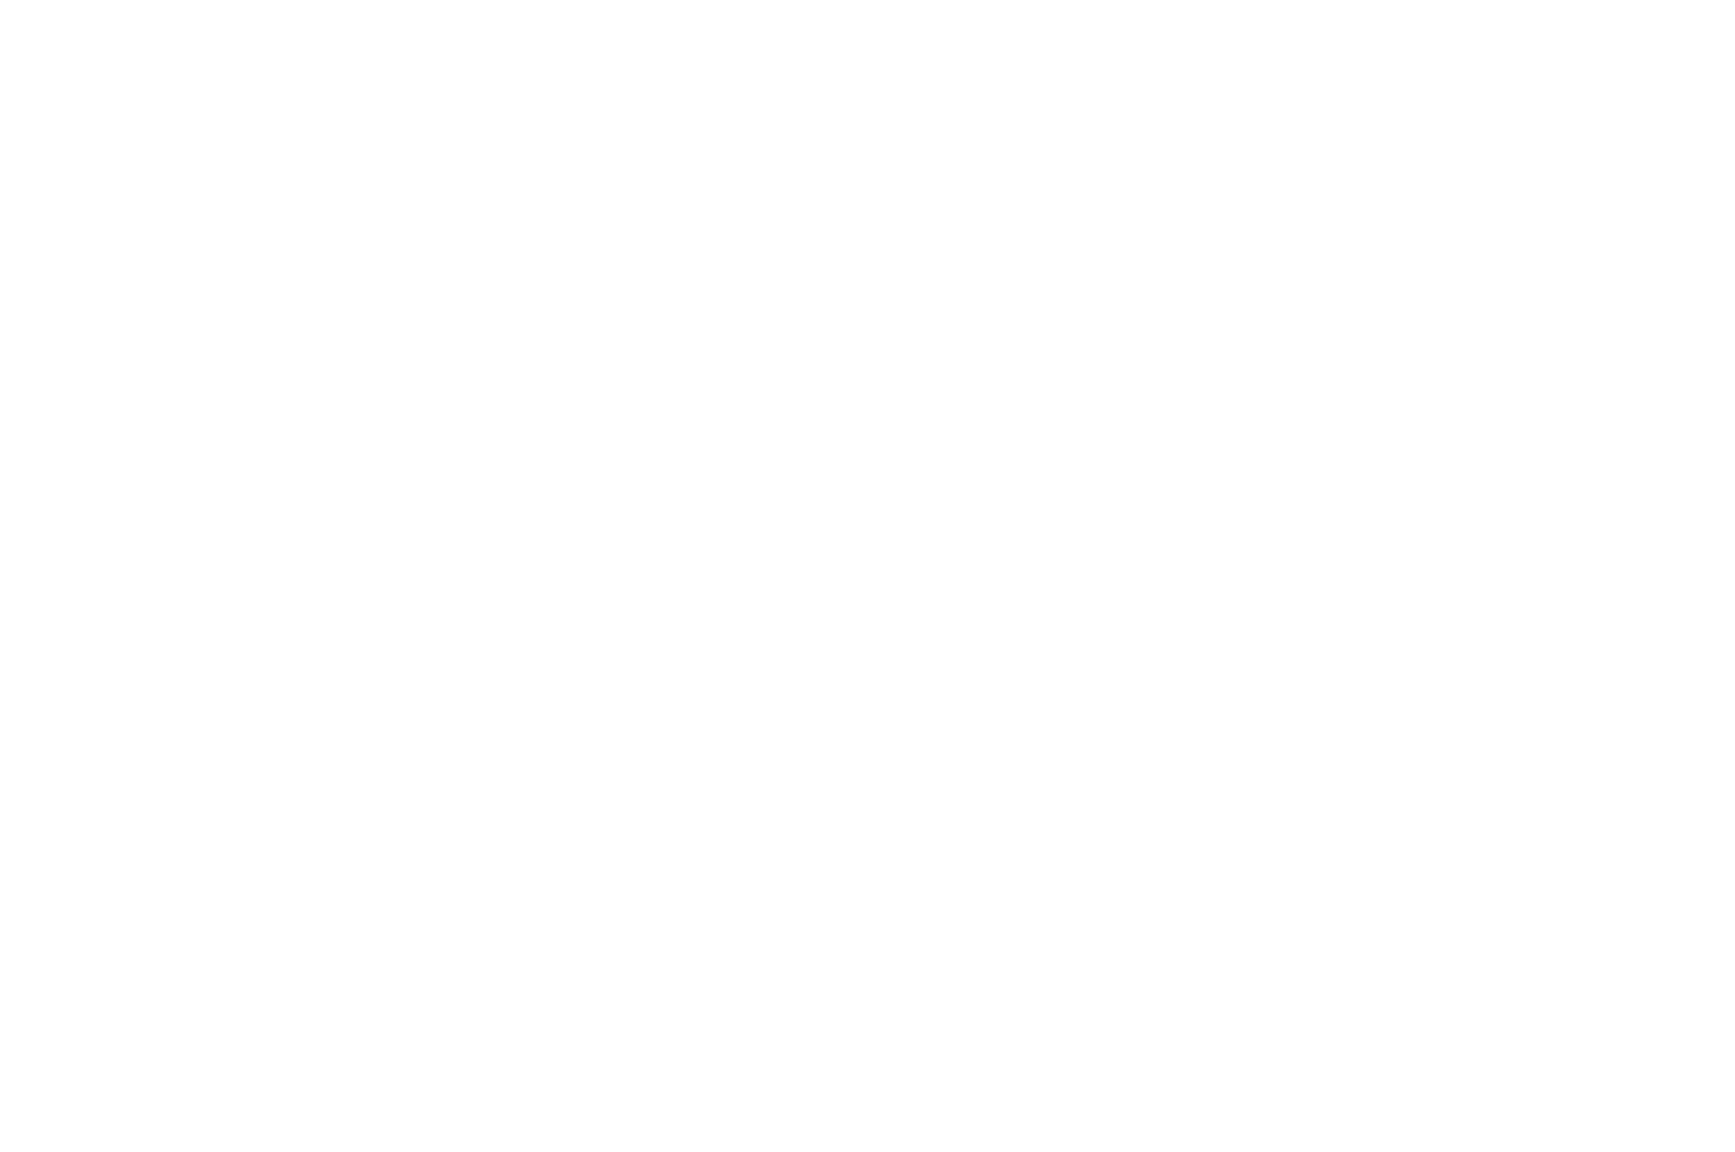 whiteBEST ACTRESS - Yh Mourhia Wright - GLOW Television  Web Series Festival.png